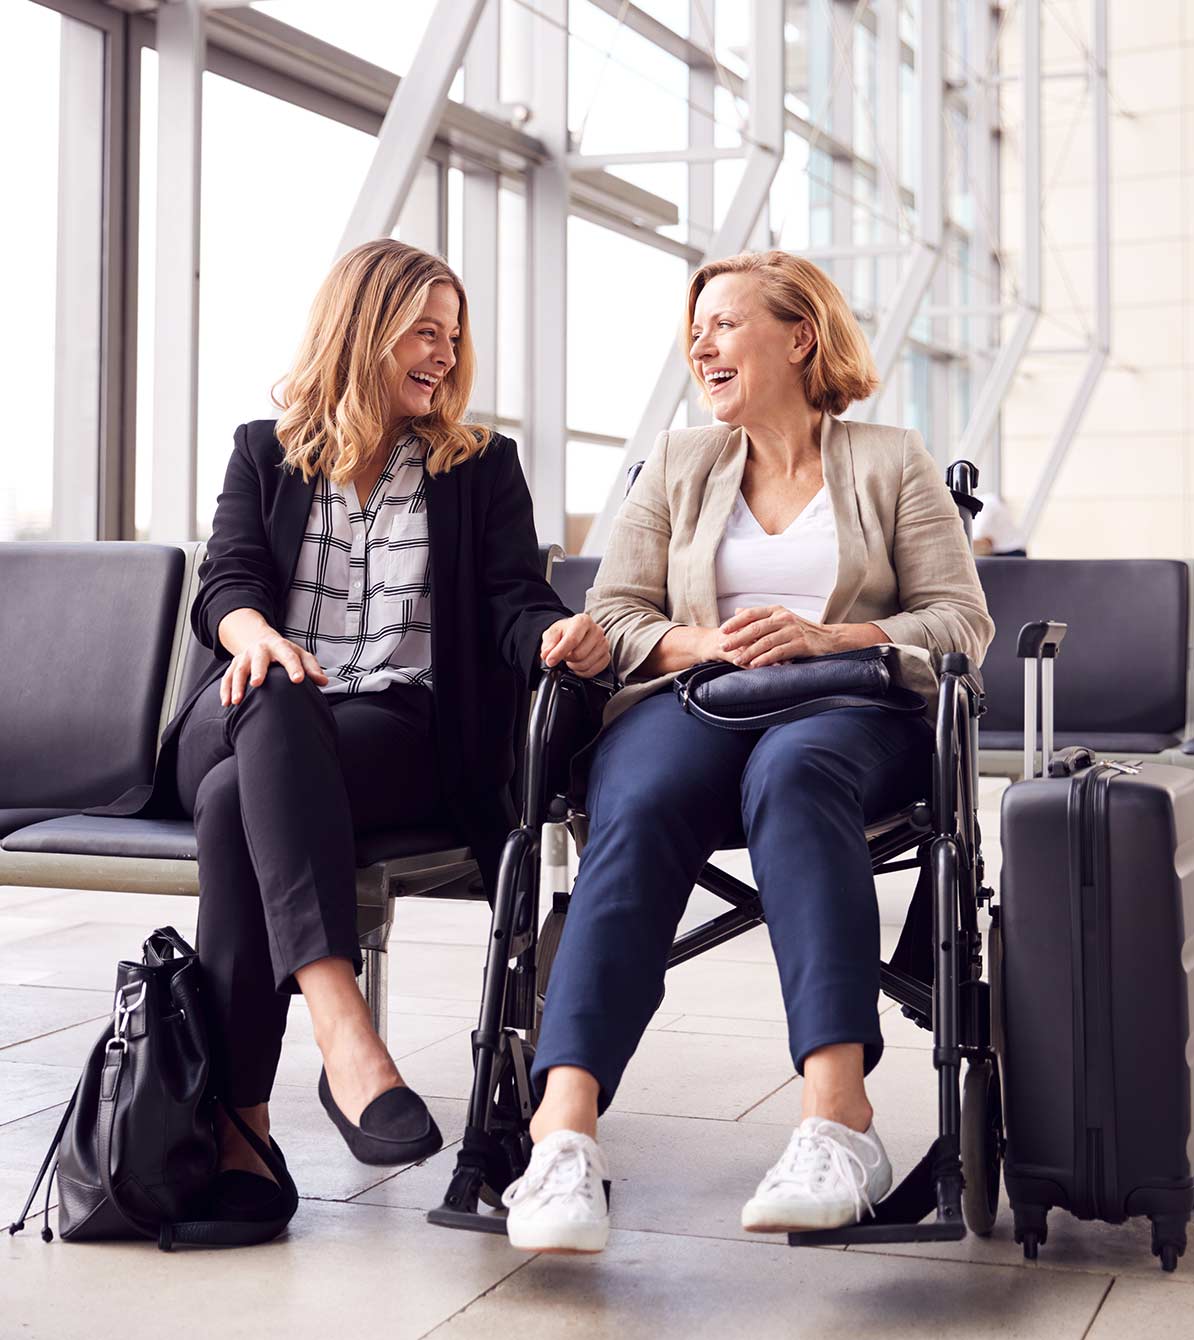 A caregiver sits in an airport with a client in a wheelchair